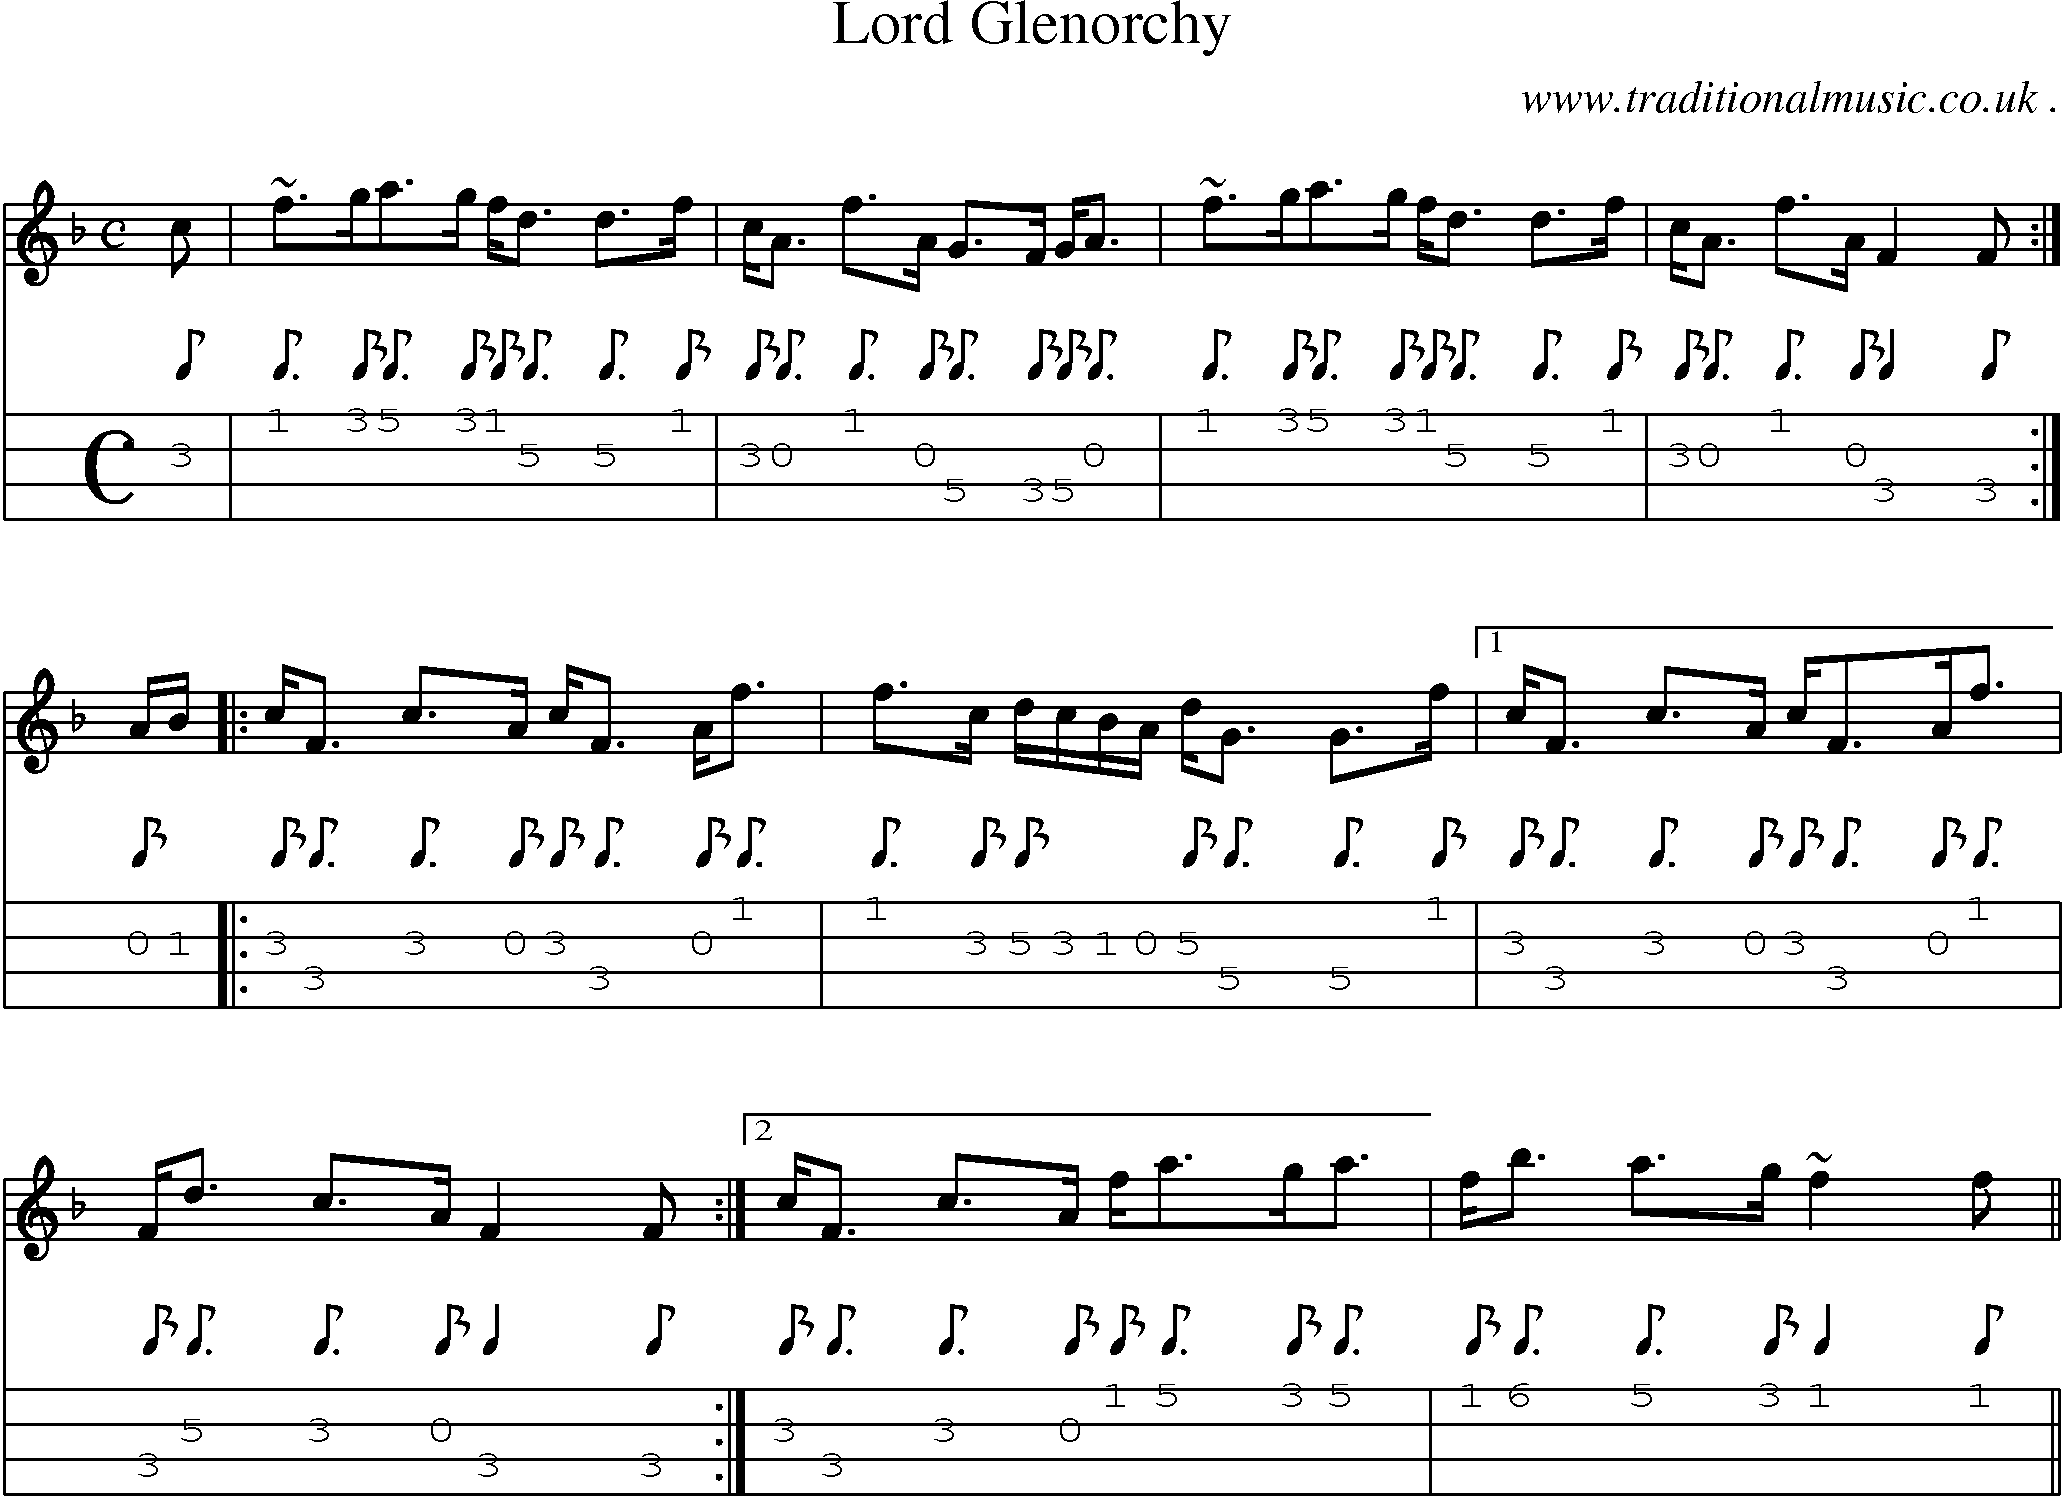 Sheet-music  score, Chords and Mandolin Tabs for Lord Glenorchy